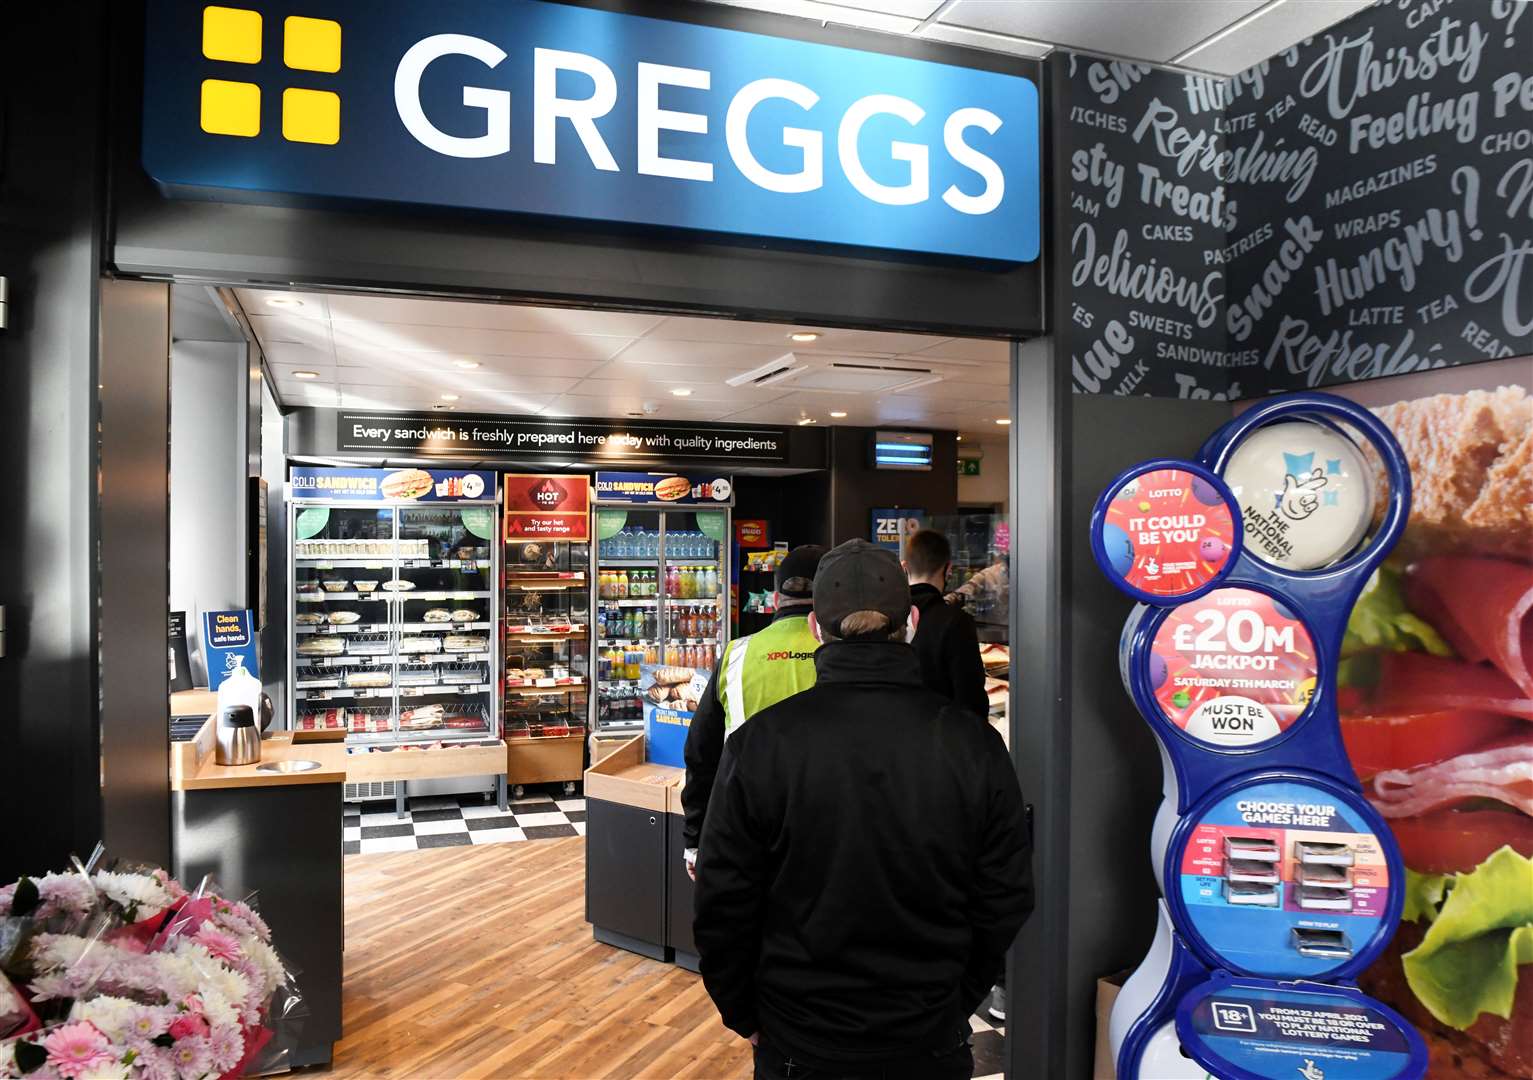 Greggs has one outlet in Inverness, inside the Esso petrol station on Longman Road. Picture: James Mackenzie.